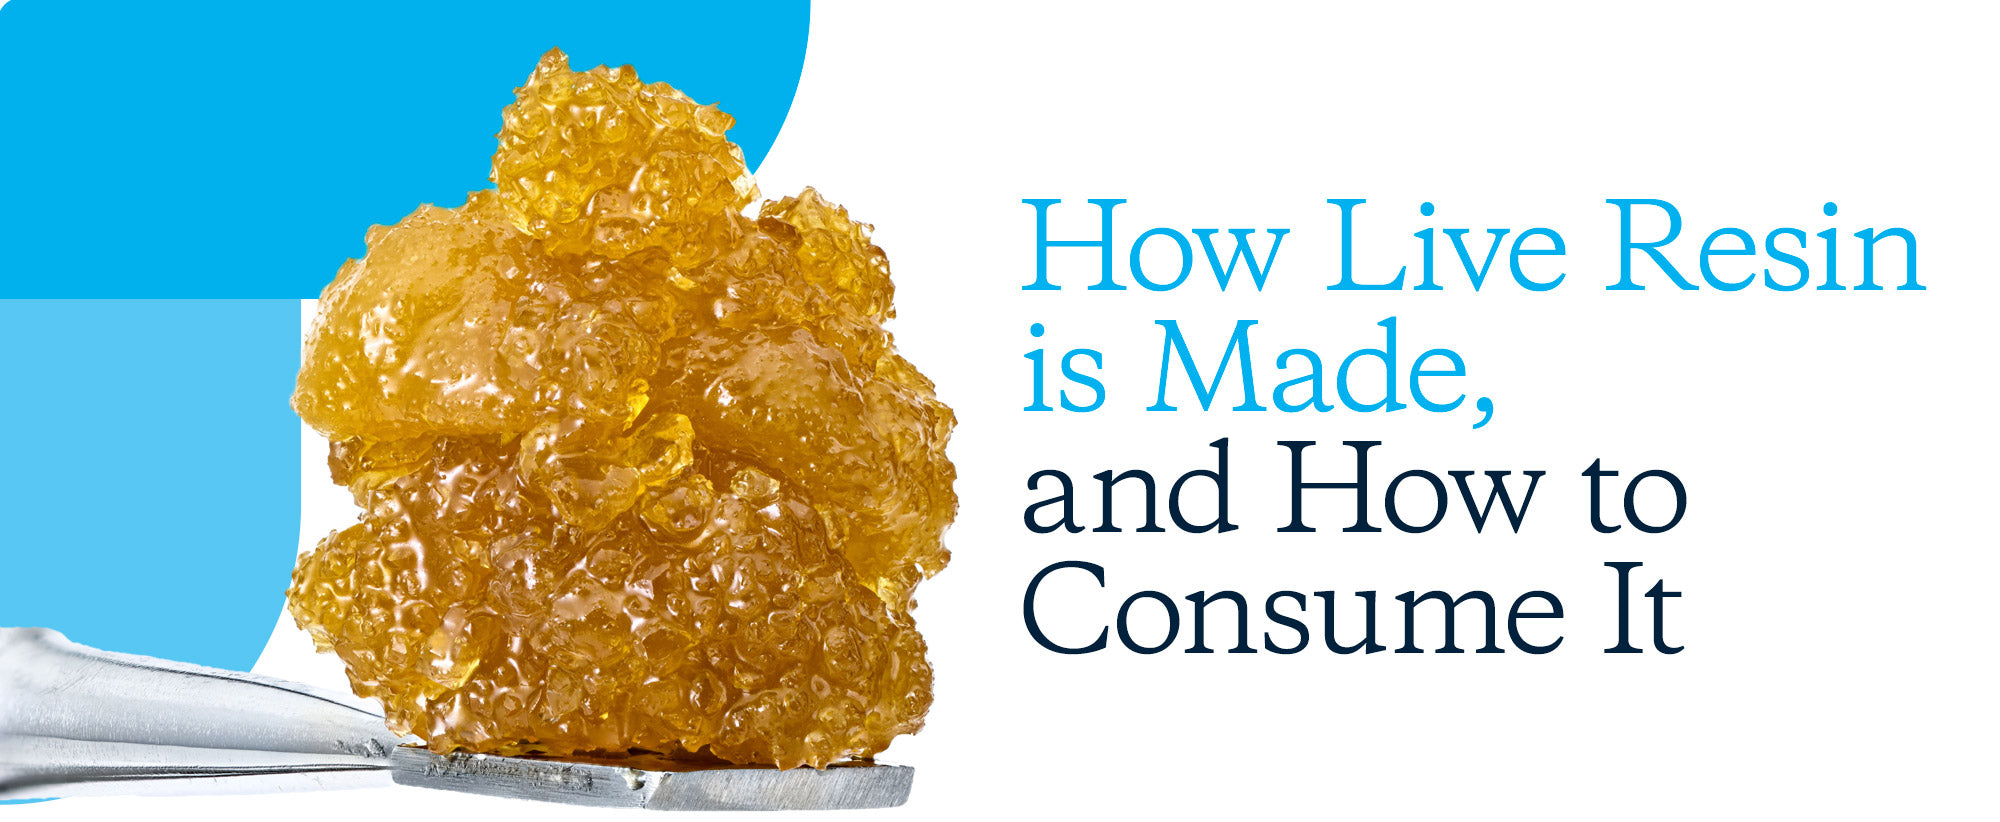 How Live Resin is Made, and How to Consume It